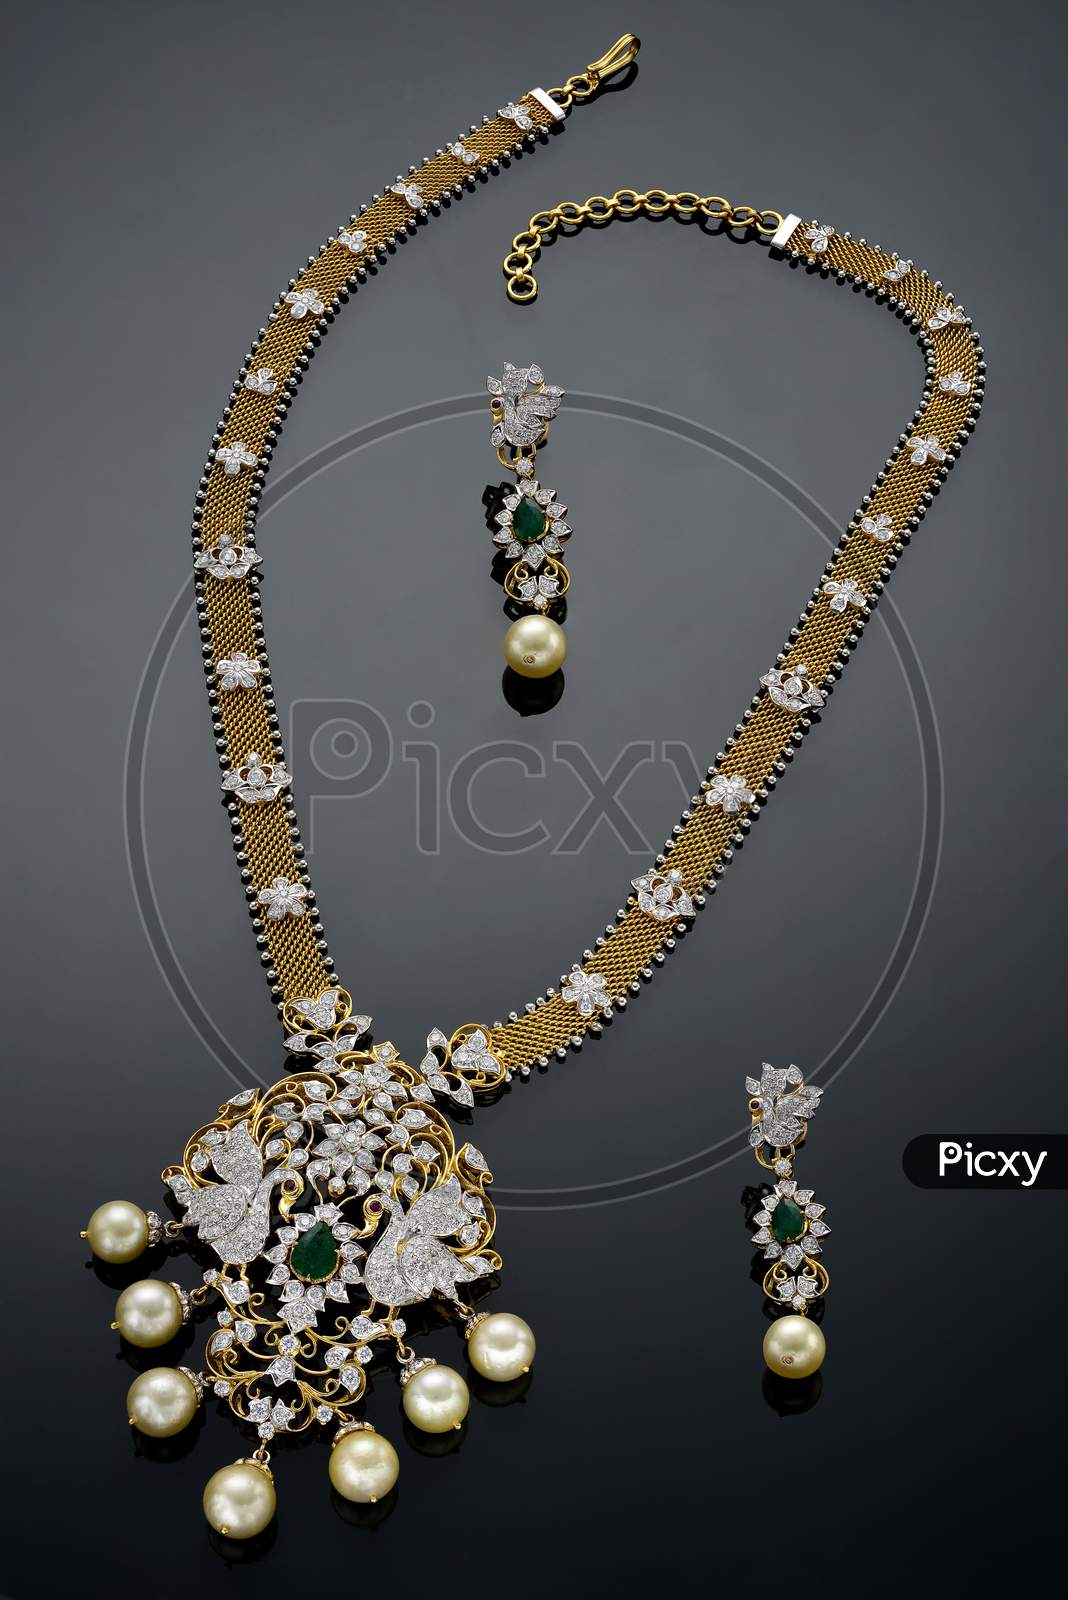 Fancy antique woman's necklace set with earrings